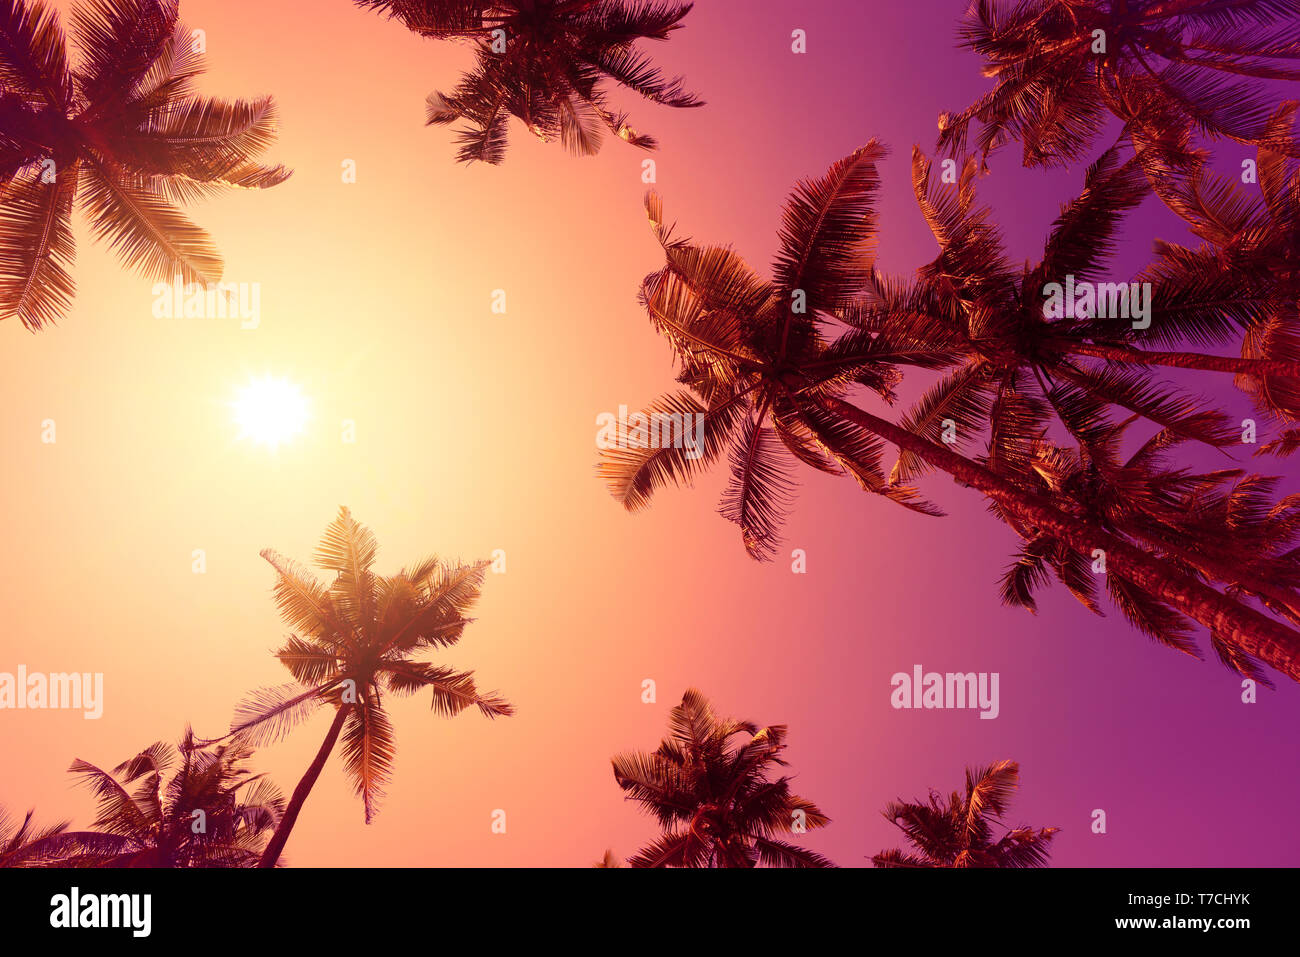 Vivid purple tropical sunset with palm trees silhouettes and shining sun Stock Photo